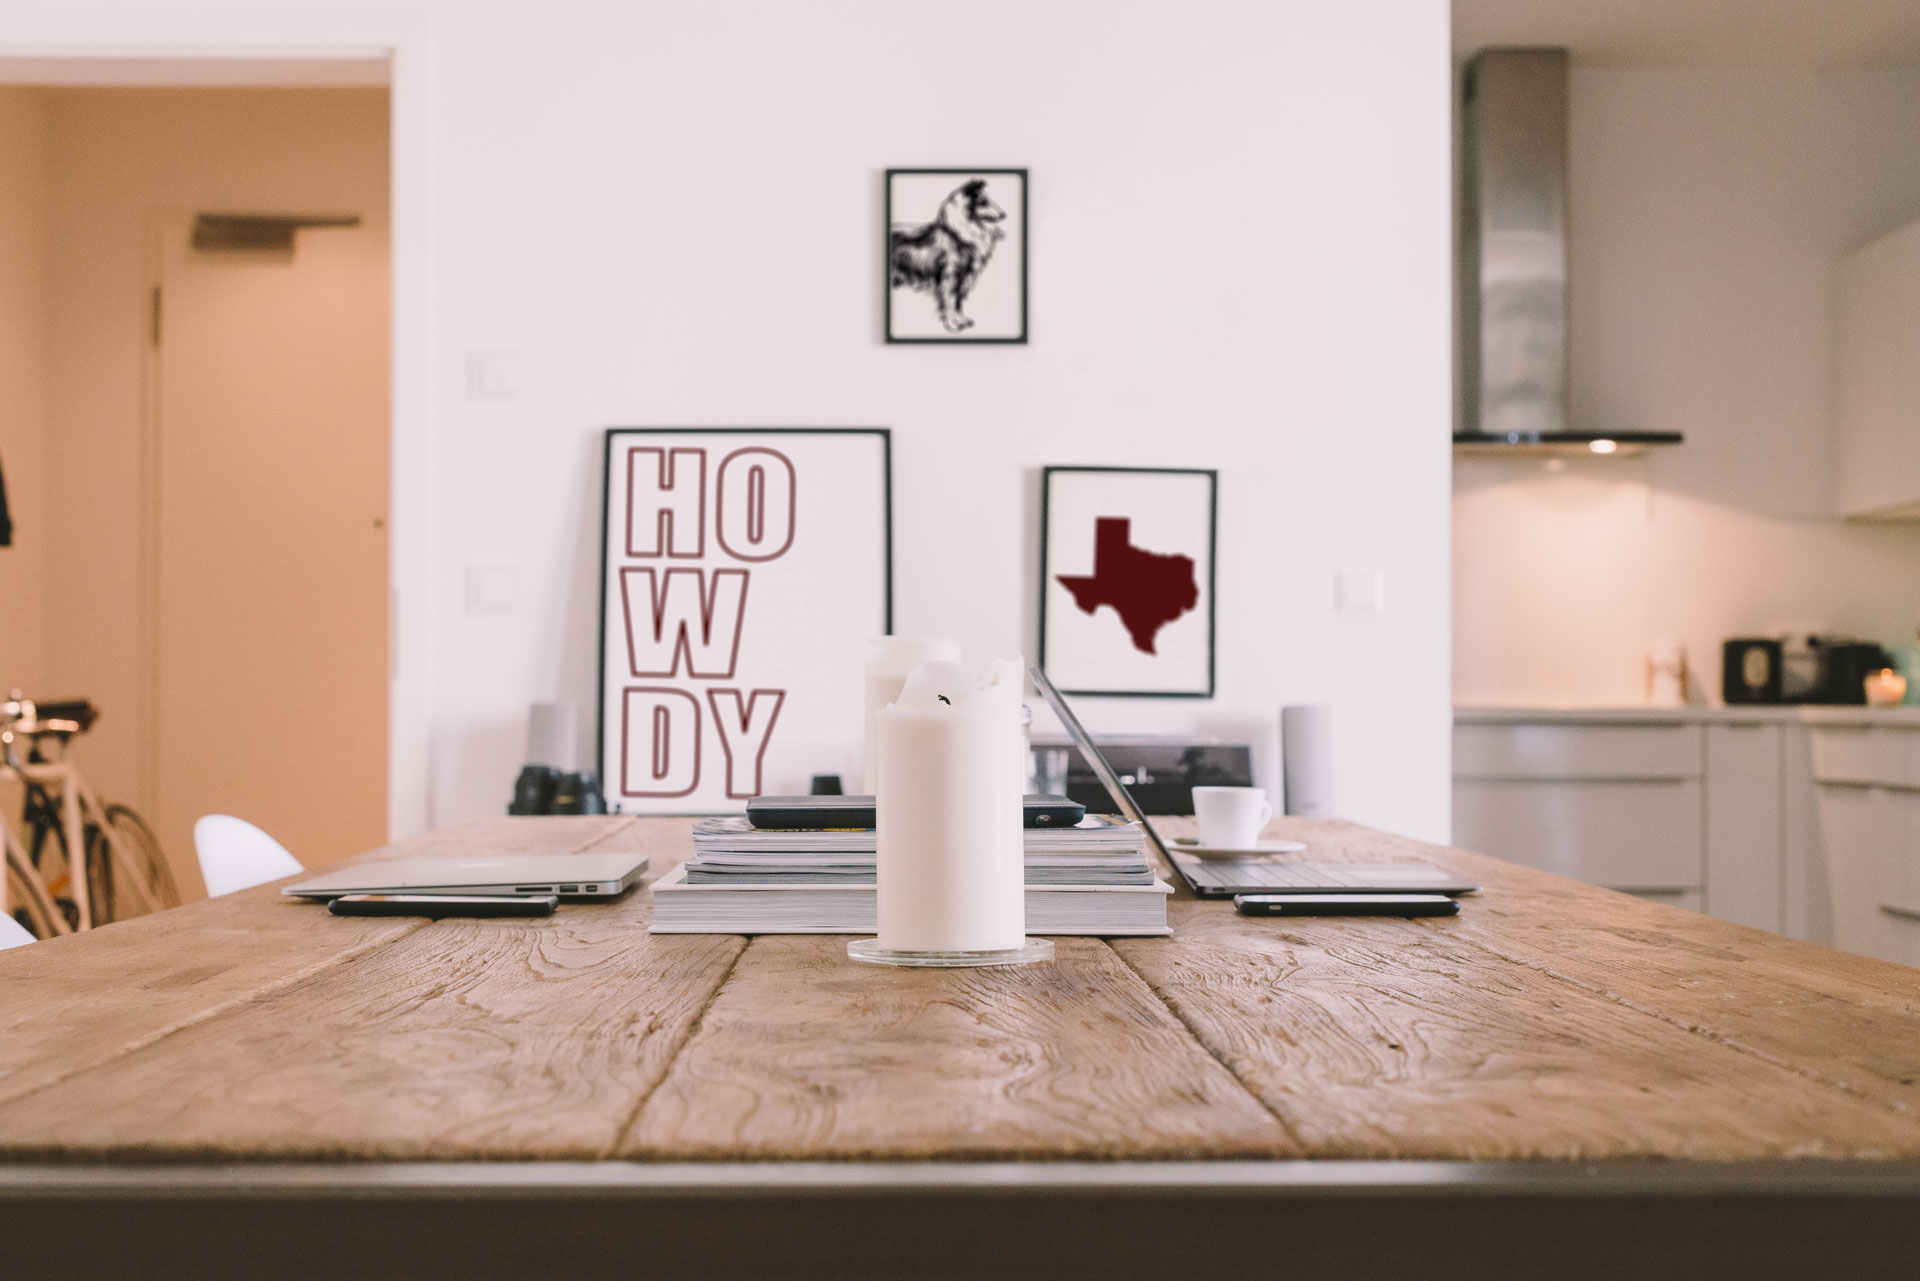 Apartment dining area with laptops and candles on a table. On the wall there are three frames: one that says howdy in block outlined letters, one of a collie, and one of the state of texas